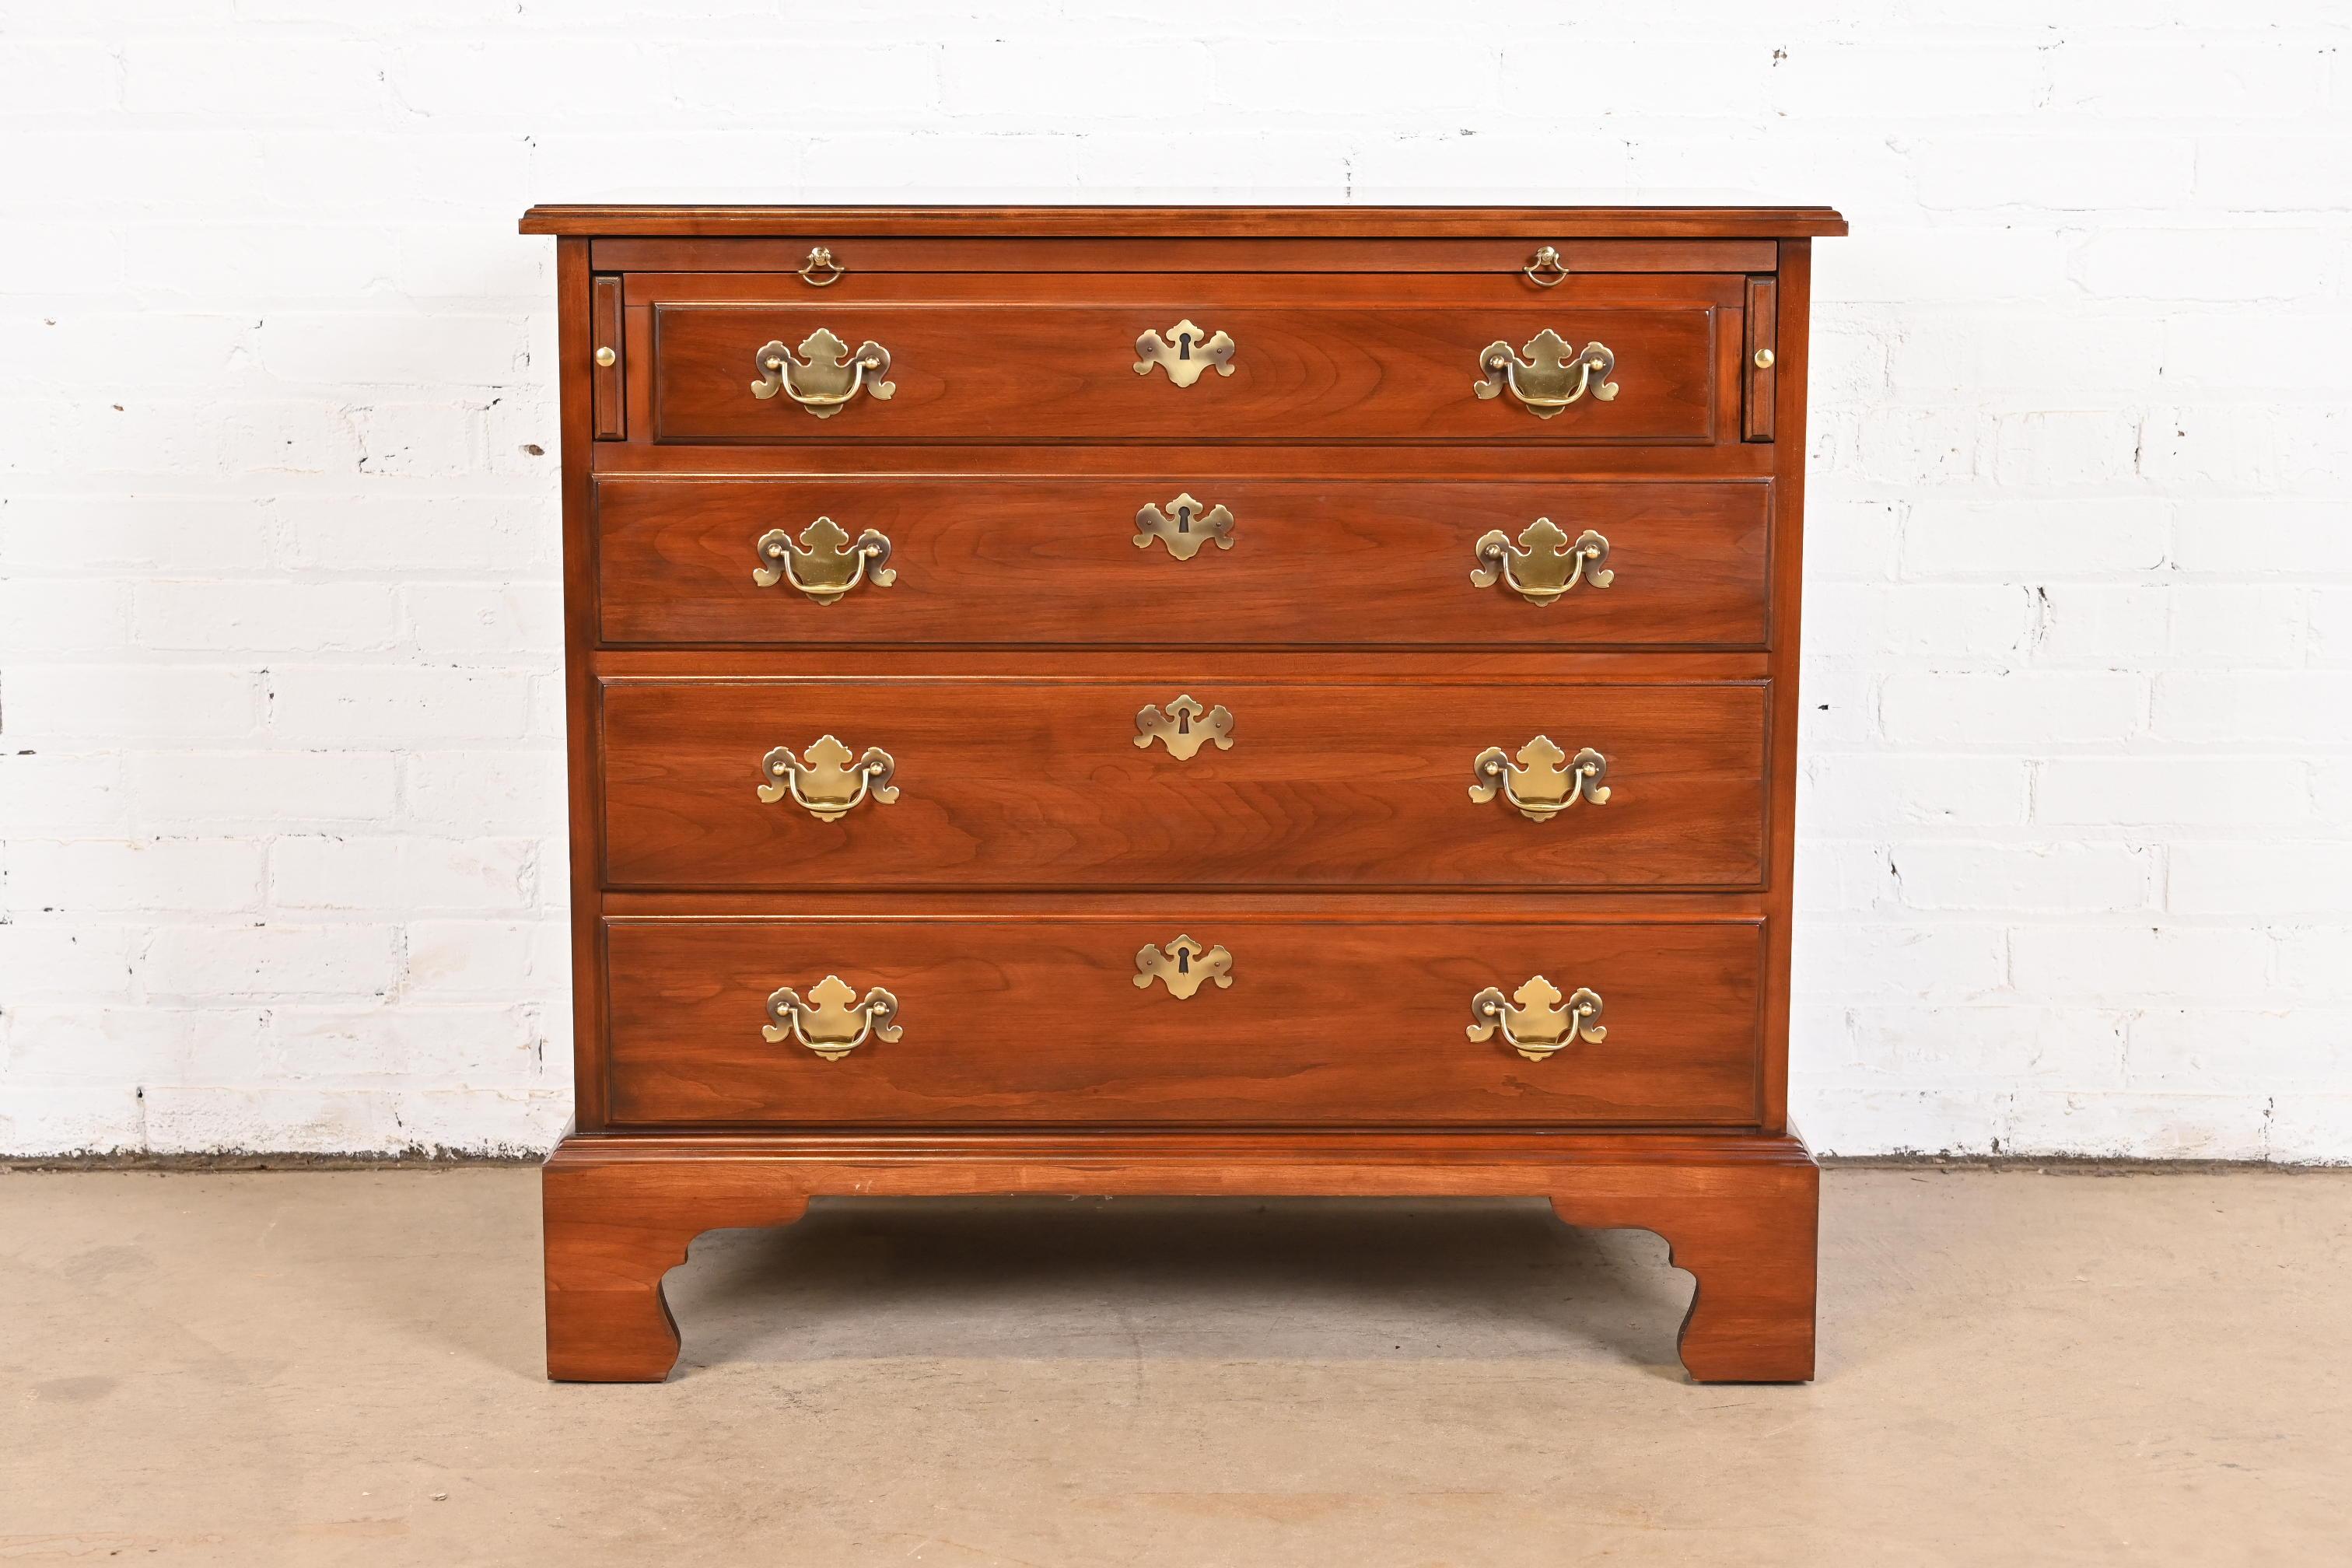 A gorgeous Georgian or Chippendale style four-drawer bachelor chest or bedside chest with pull-out tray

By Henkel Harris

USA, 1977

Solid cherry wood, with original brass hardware.

Measures: 33.25